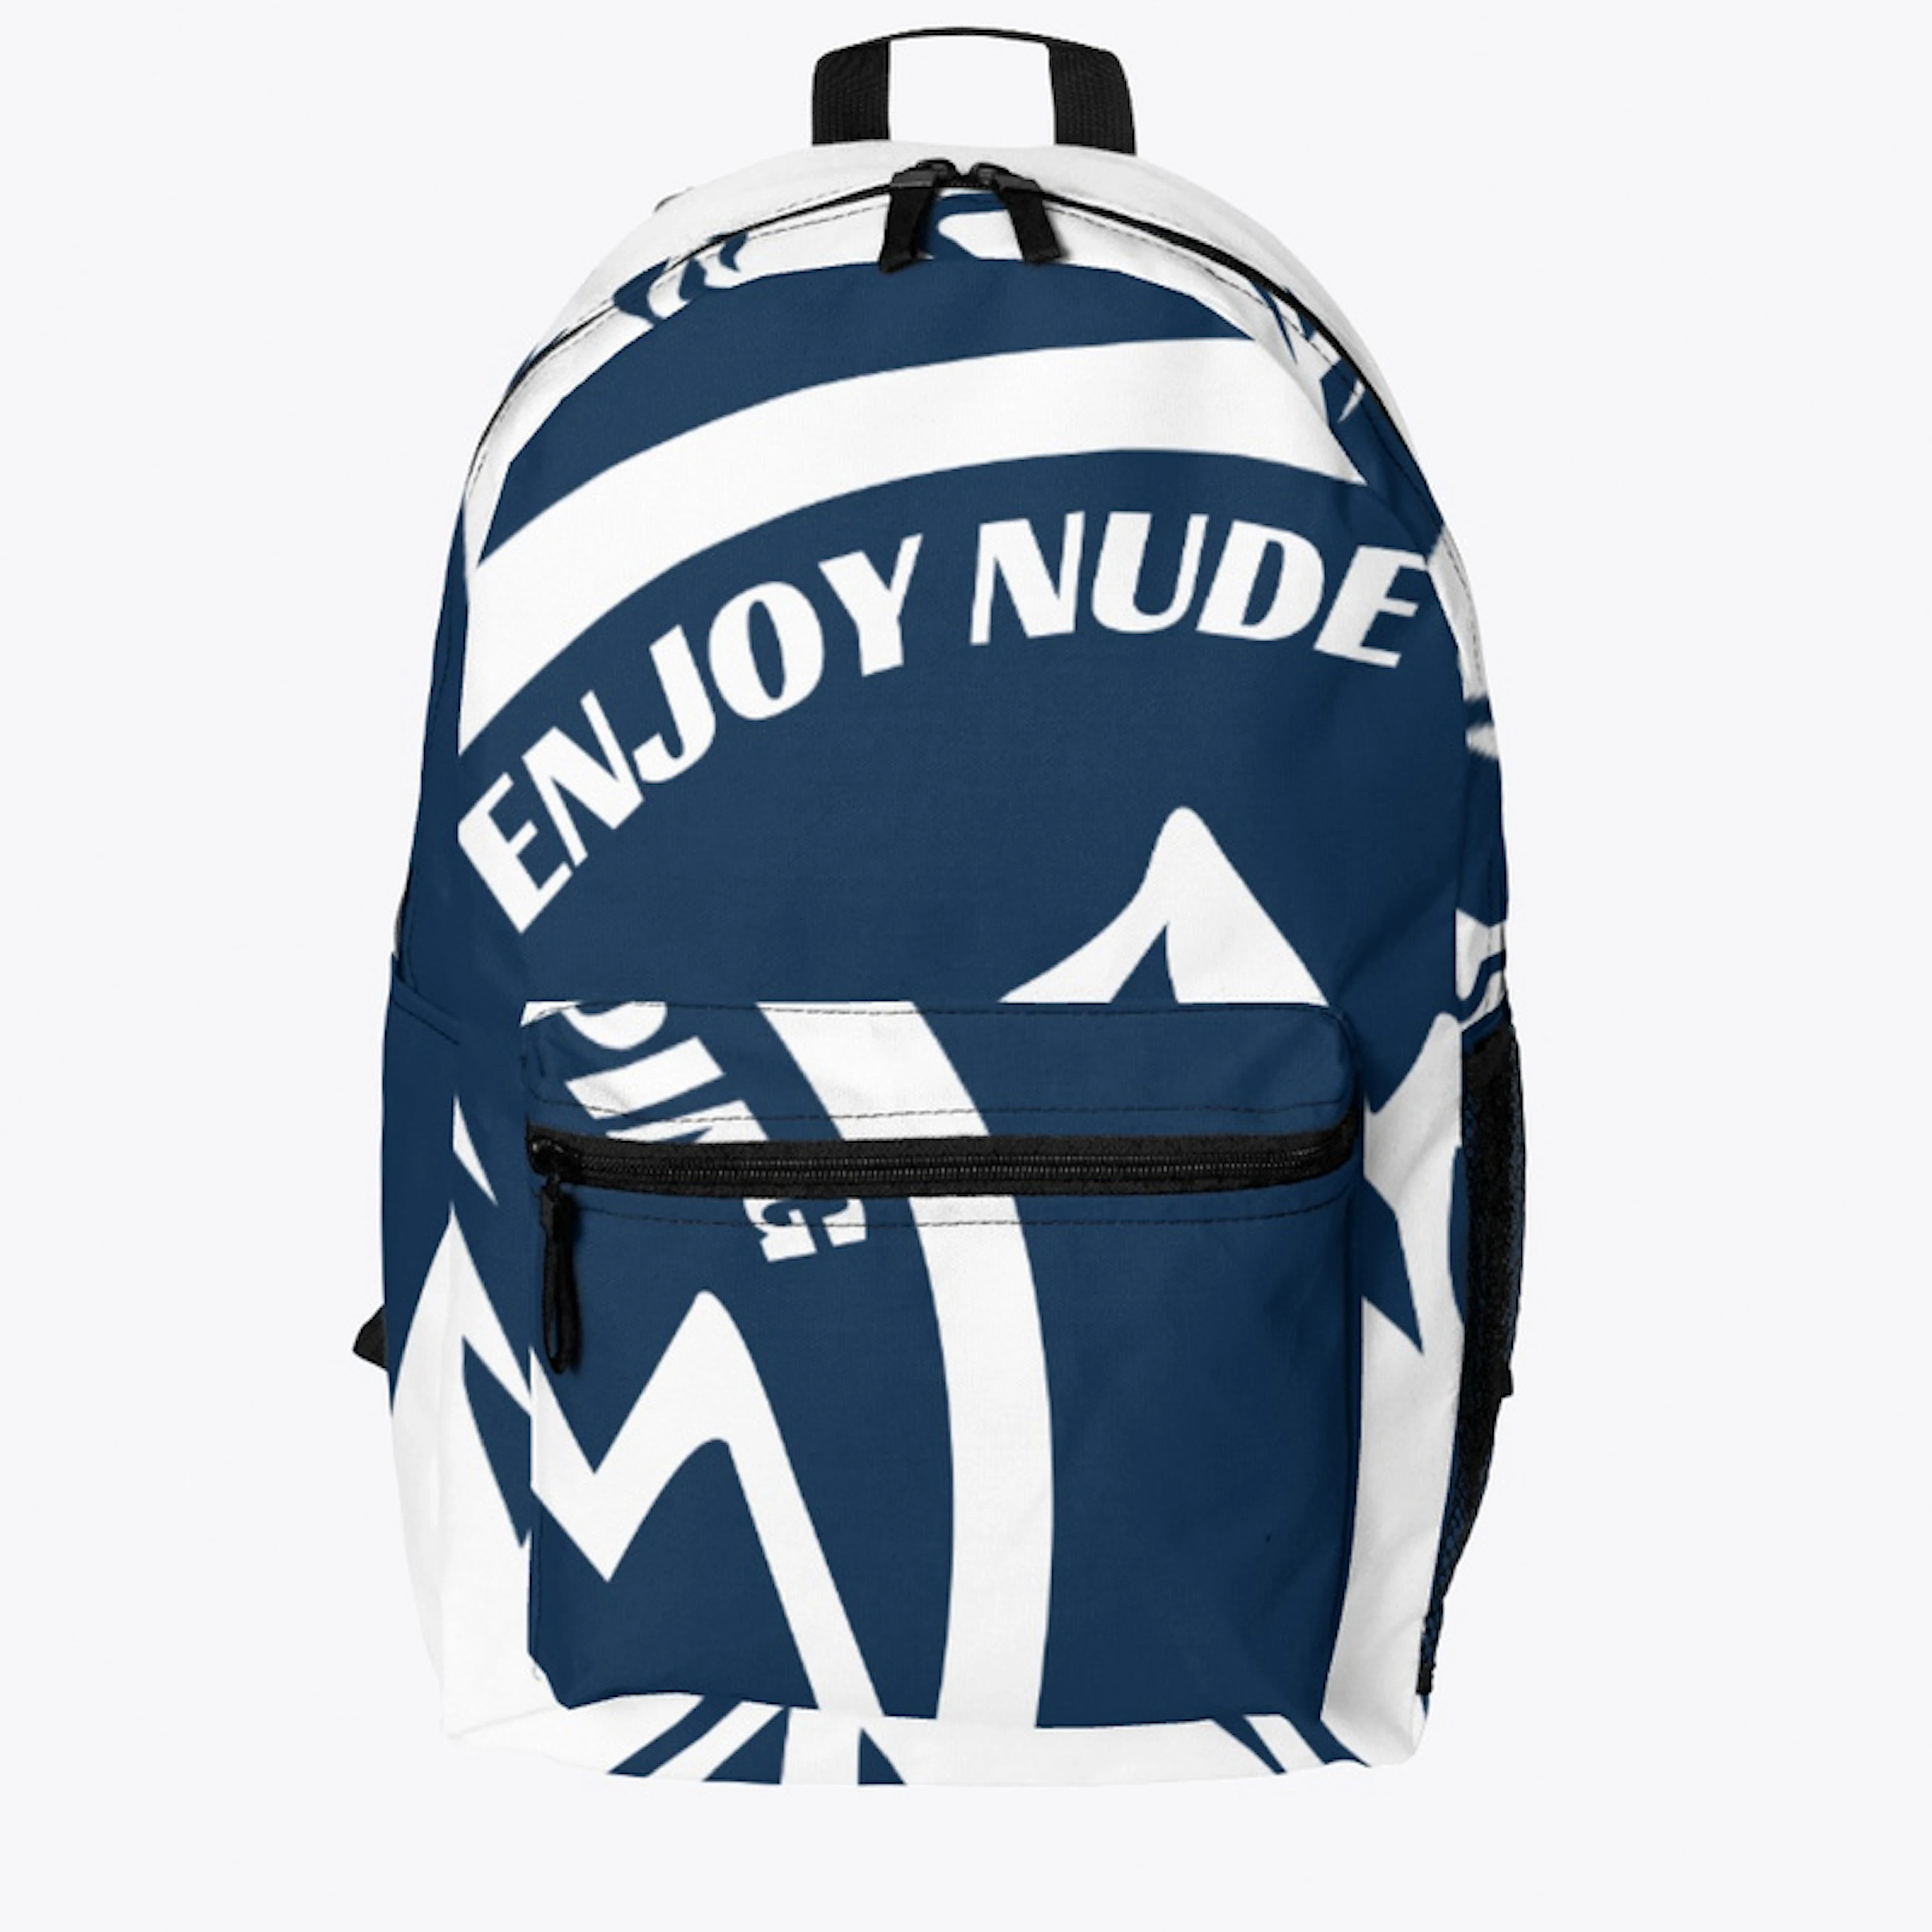 Enjoy Nude Camping Site W